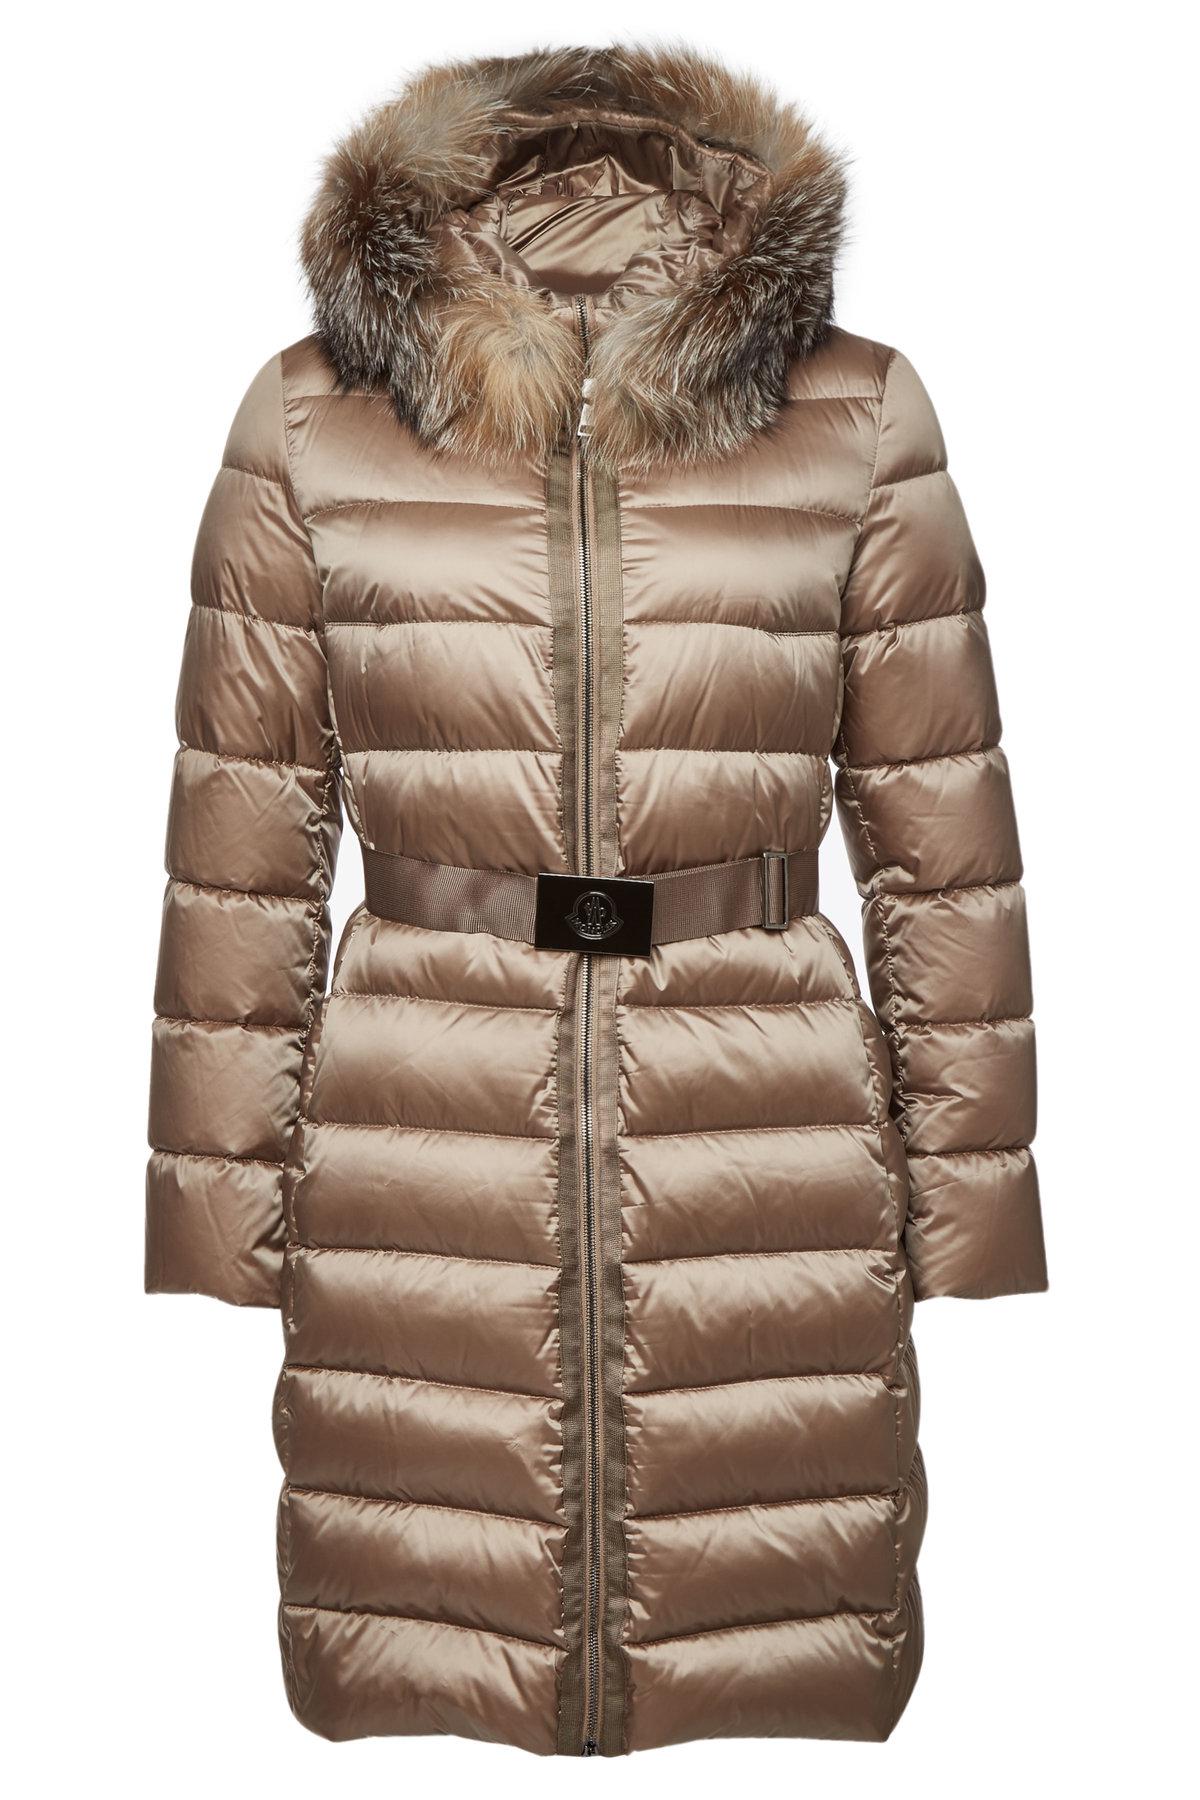 moncler tinuviel review